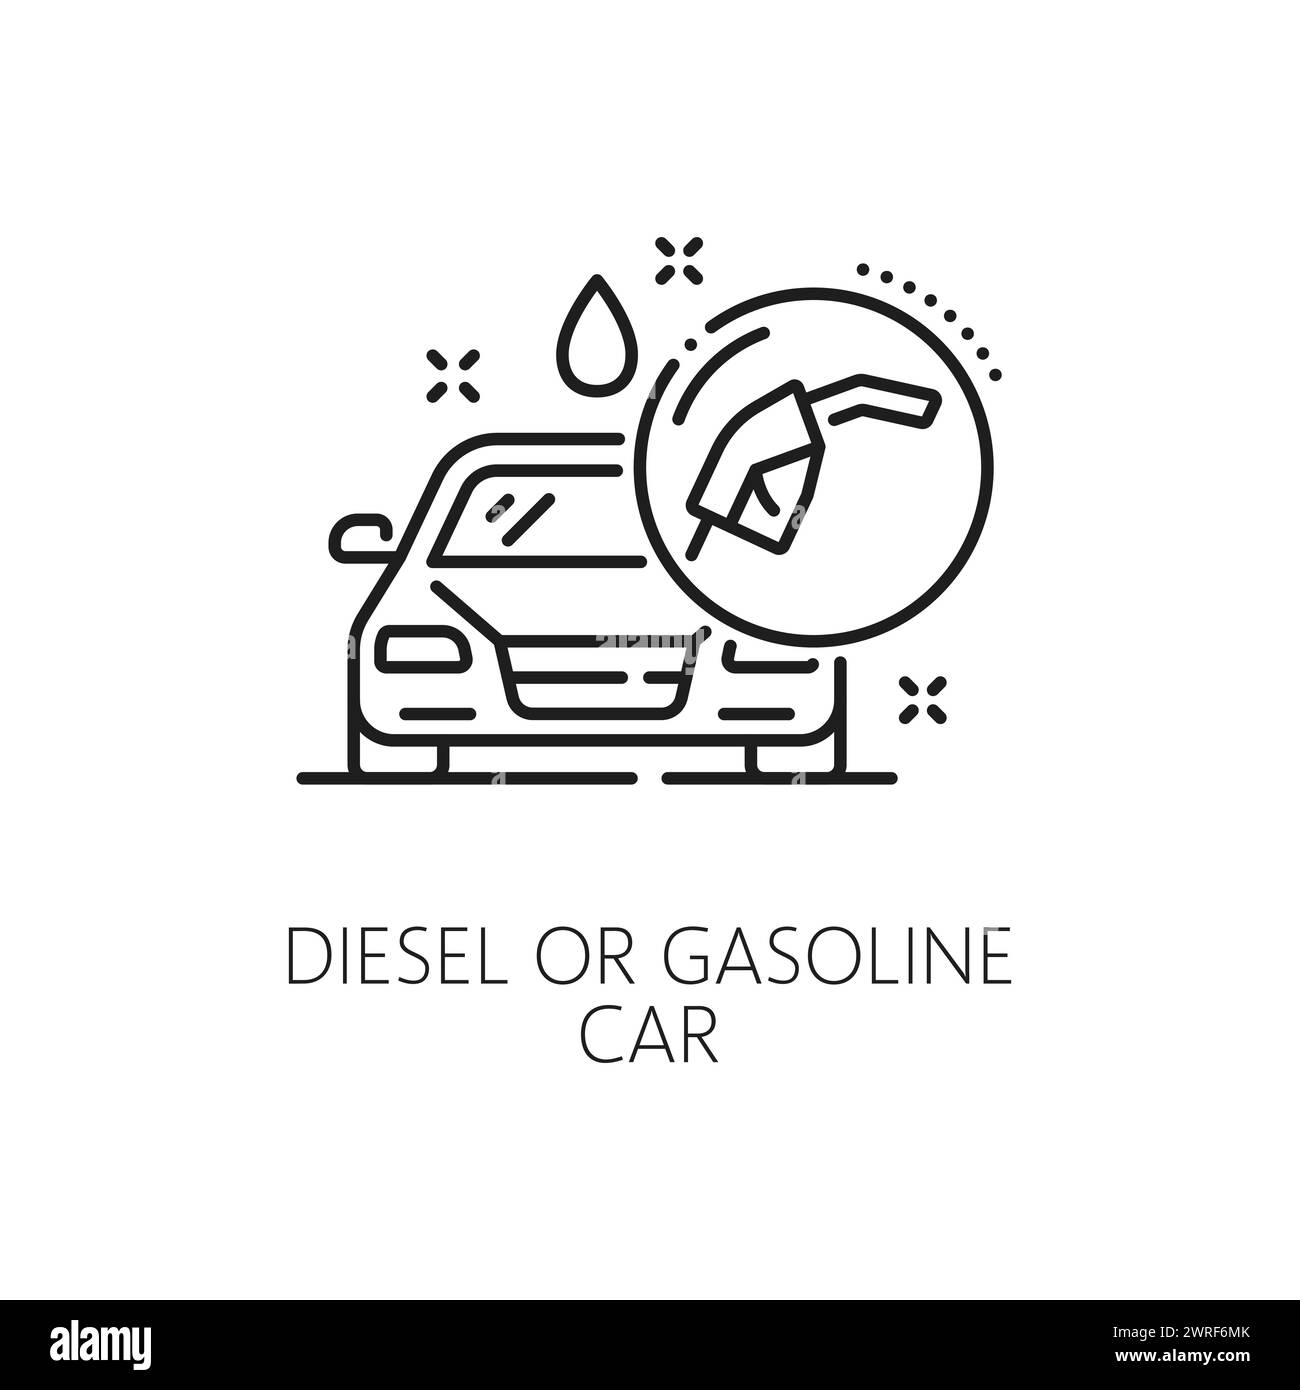 Car diesel or gasoline line icon, dealership and automobile dealer center vector symbol. Diesel or gasoline fuel vehicle outline icon for petrol station, auto salon or vehicle buy and sell service Stock Vector